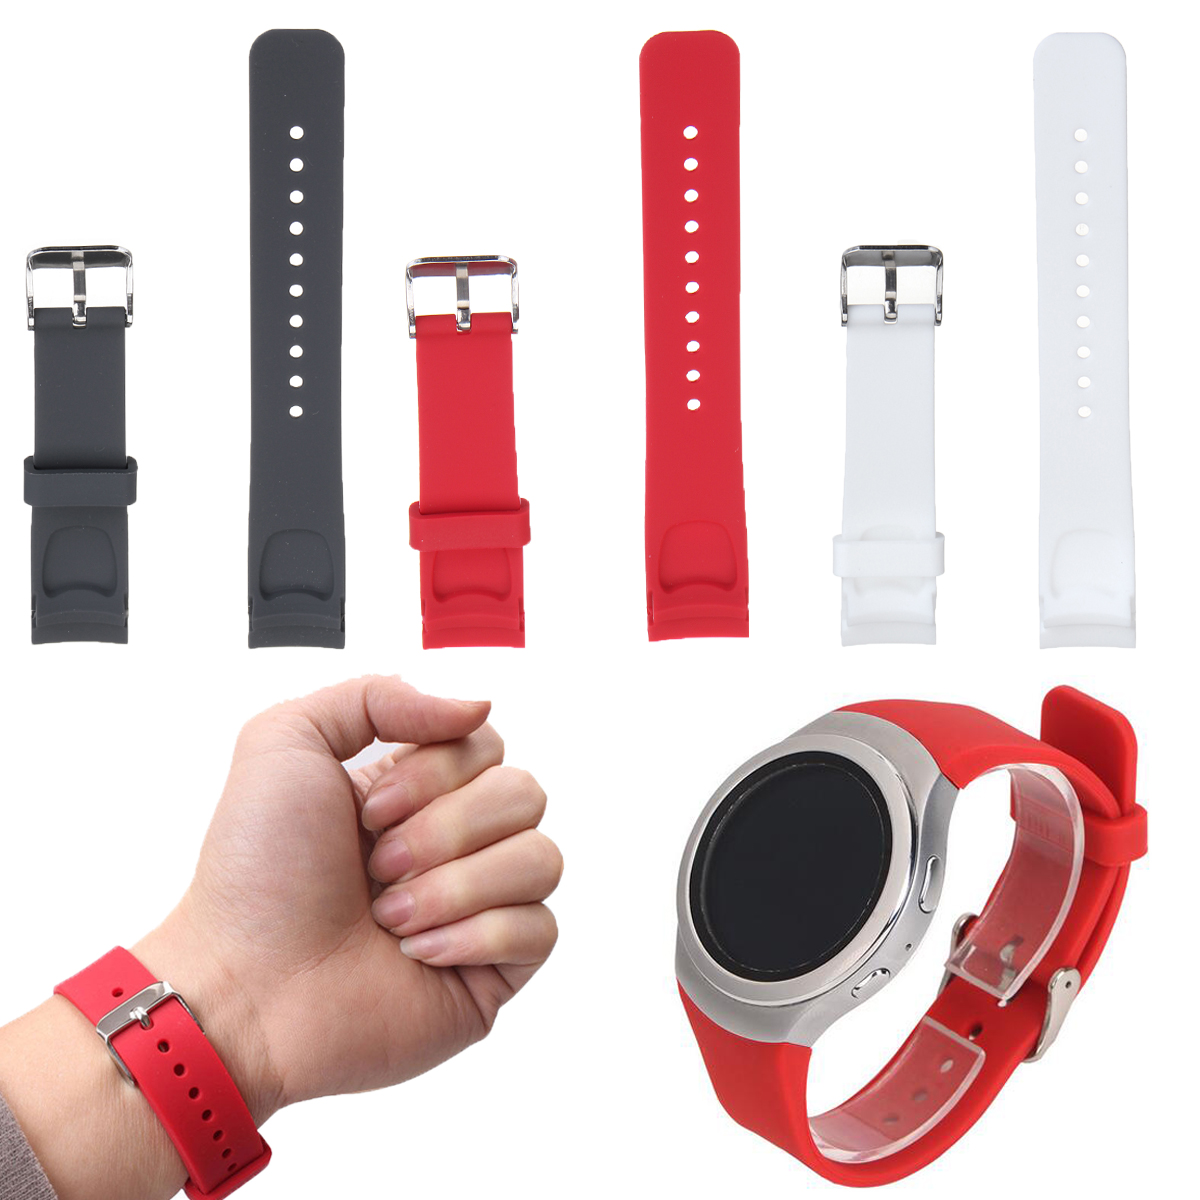 

Silicone Smart Watch Band Solid Color Wrist Strap for Samsung Galaxy Gear S2 Classic SM-R732